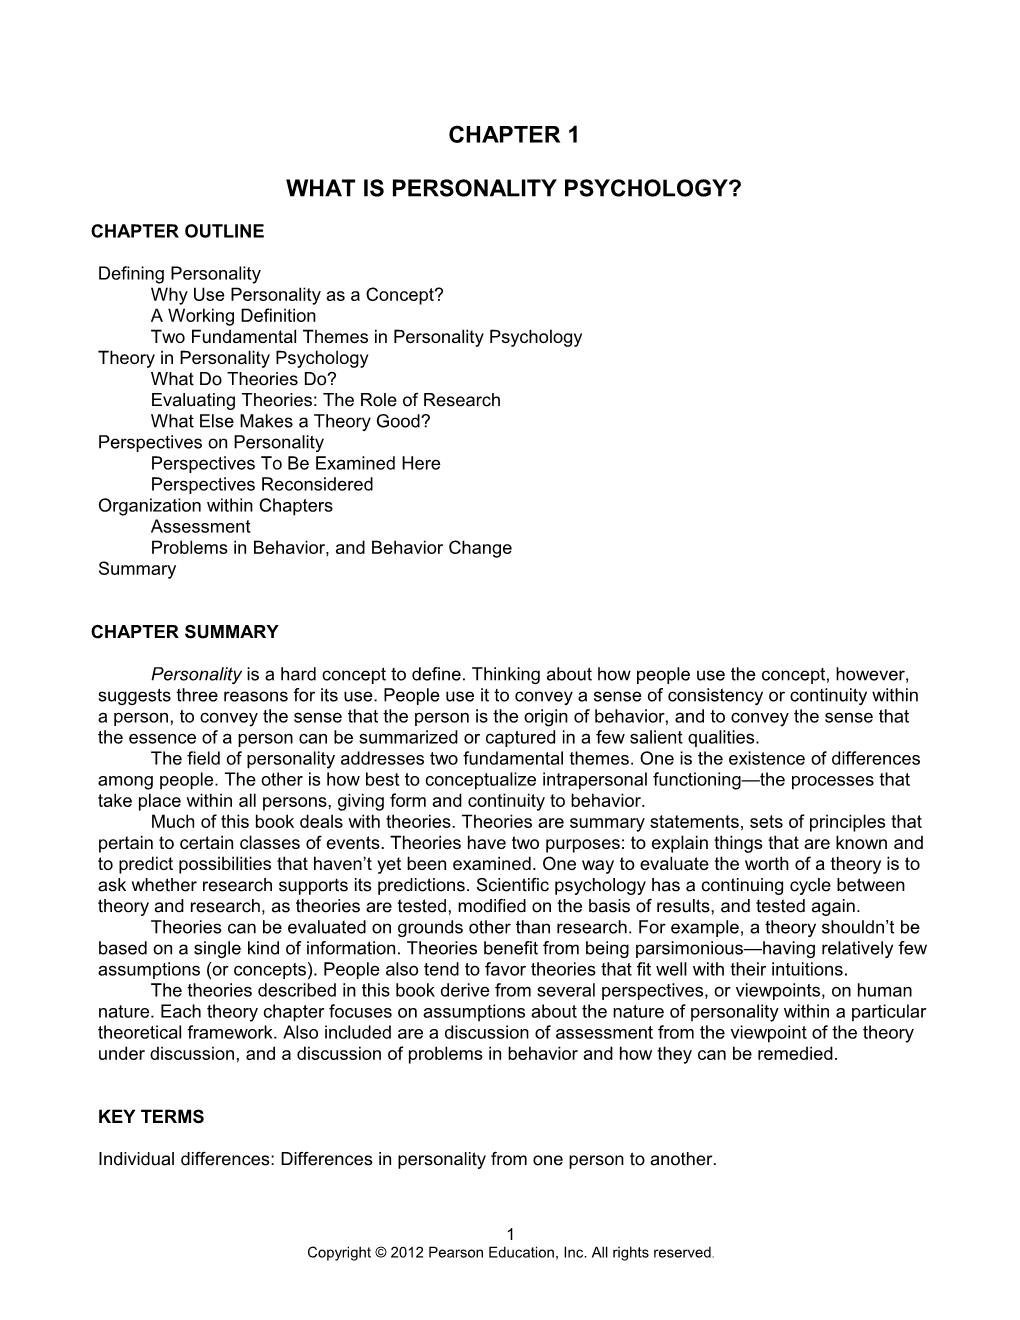 What Is Personality Psychology?